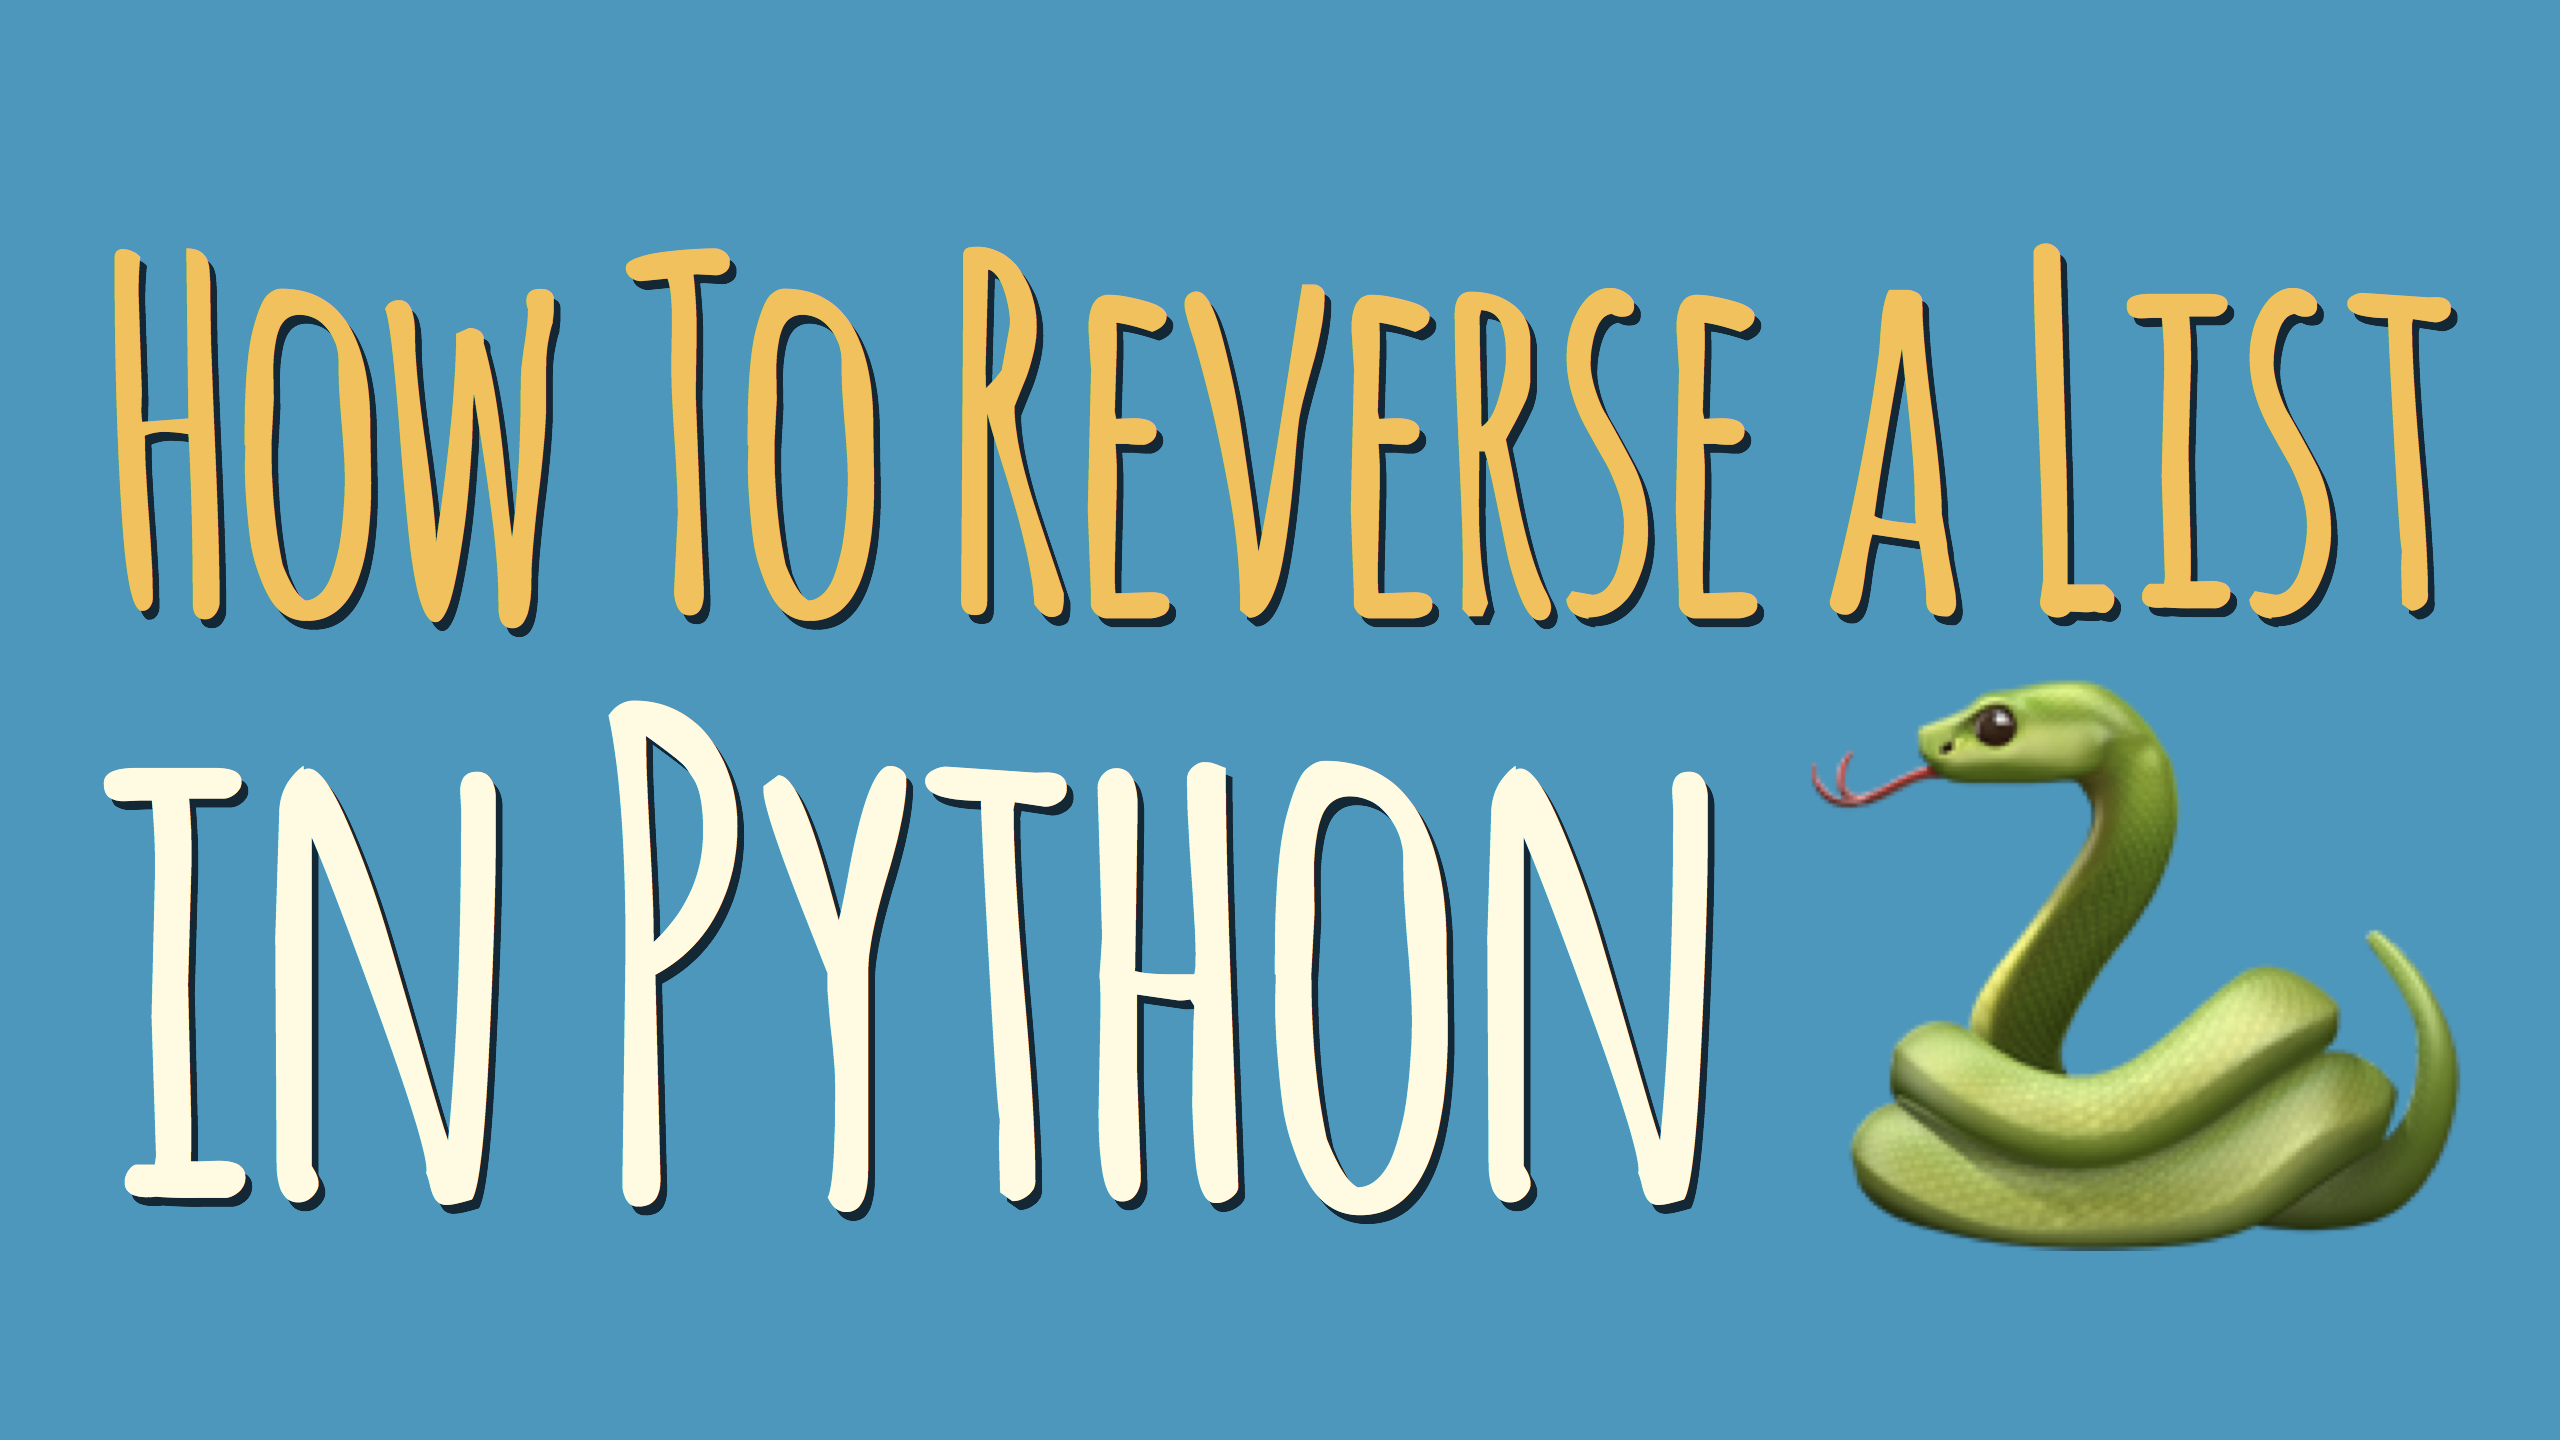 How to Reverse a List in Python